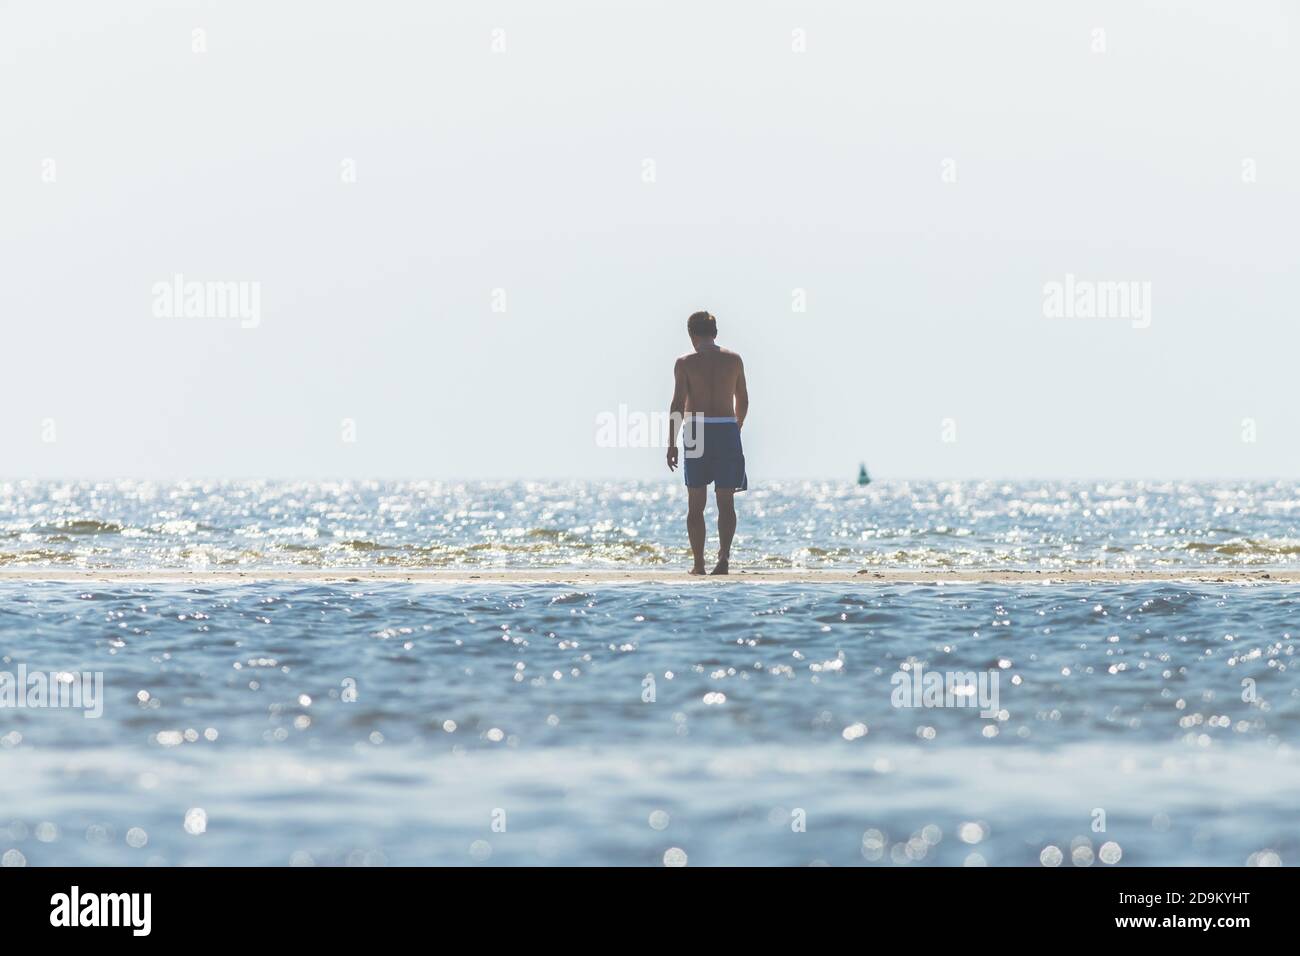 Beach recreation - man in swimming trunks looks out over the water and watches the waves. Stock Photo